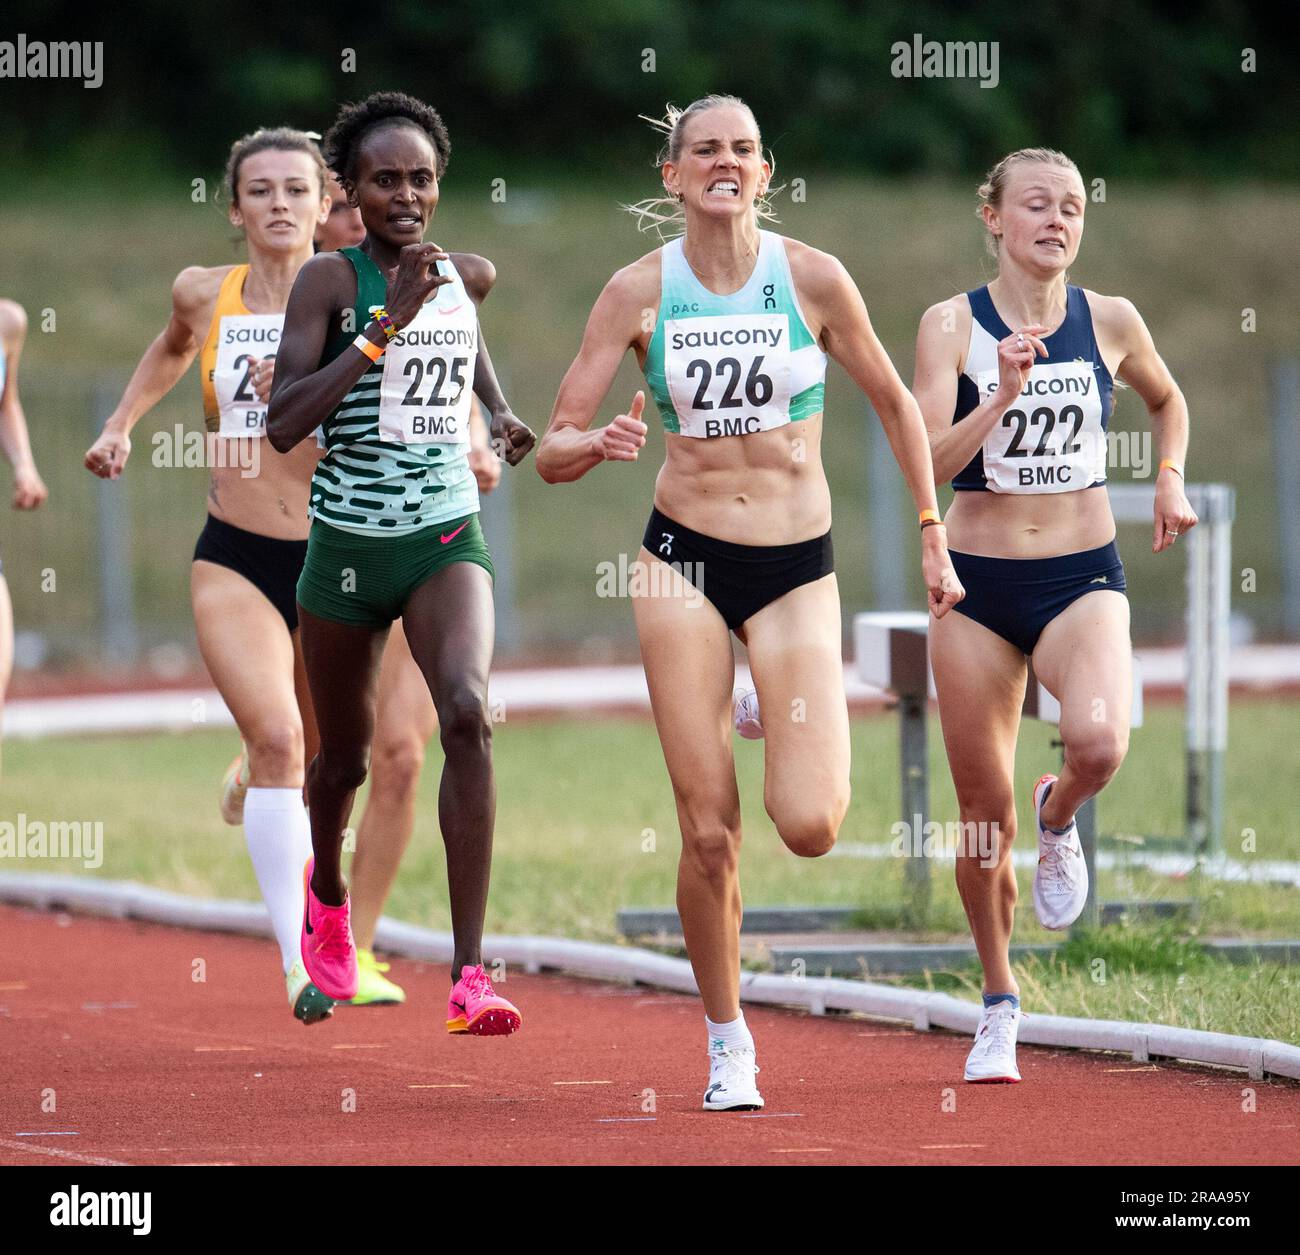 Mary Ekiru, Maudie Skyring and Niamh Bridson Hubbard competing in the BMC women’s 1500m A race at the British Milers Club Grand Prix, Woodside Stadium Stock Photo